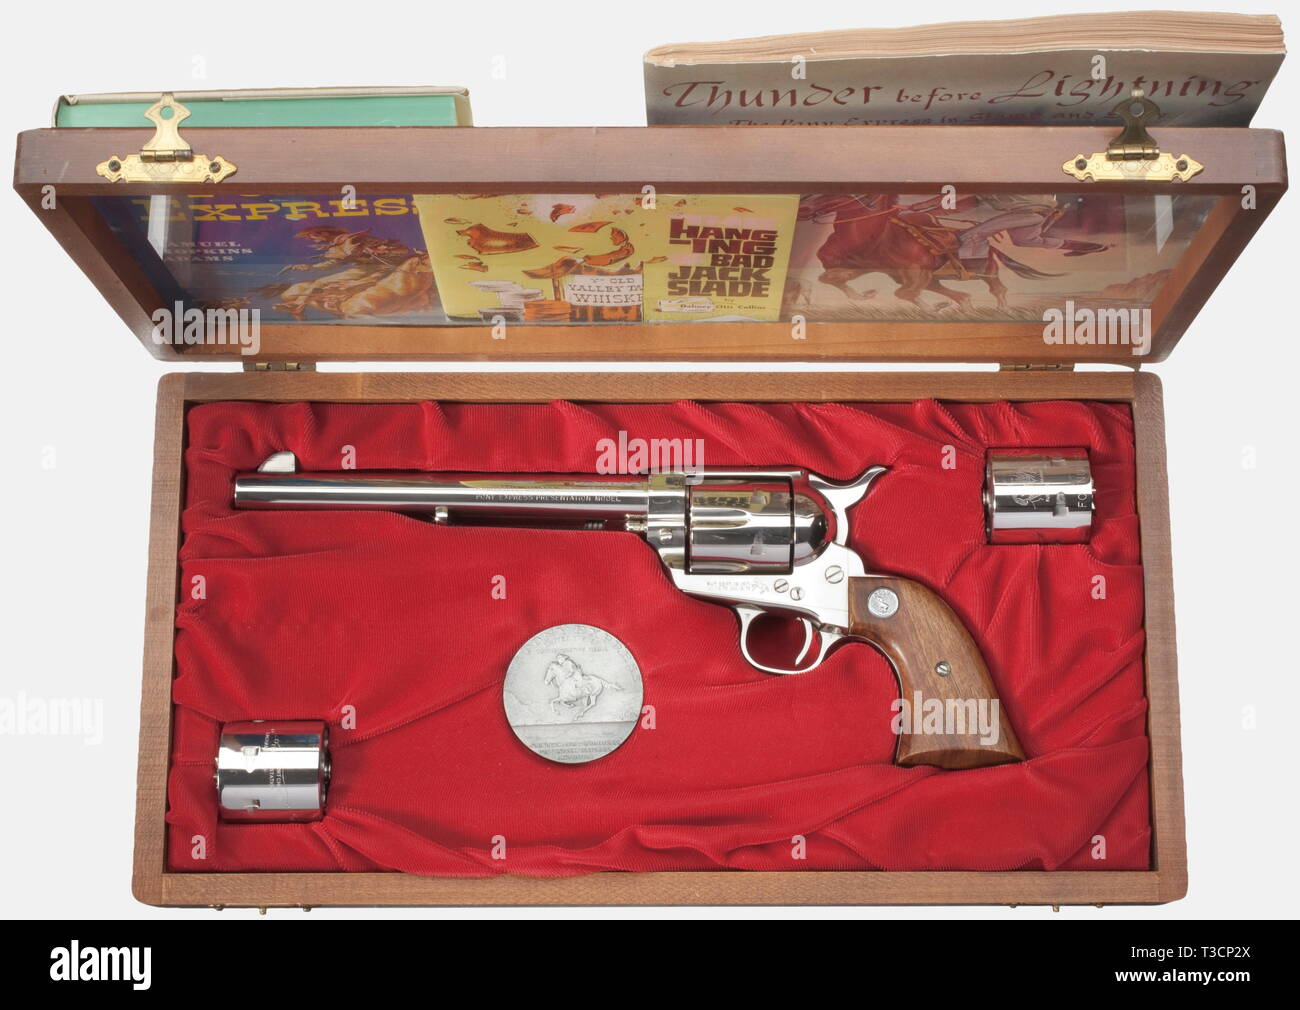 A Colt SAA 'Pony Express', cal..45LC, no. PE151-E, production year 1964. Bright bore, 7.5'-barrel with standard inscription on upper side, marked 'Colt Peacemaker' on the right. On the left side marked 'Russell, Majors and Waddell Pony Express Presentation Model'. Cylinder with German proof mark. Completely nickel-plated, walnut grip panels with inlaid Colt logo, grip frame marked 'Sacramento to Friday's Station'. In presentation case plus two engraved spare cylinders with portraits of Pony Express founders and Pony Express route as well as a com, Additional-Rights-Clearance-Info-Not-Available Stock Photo